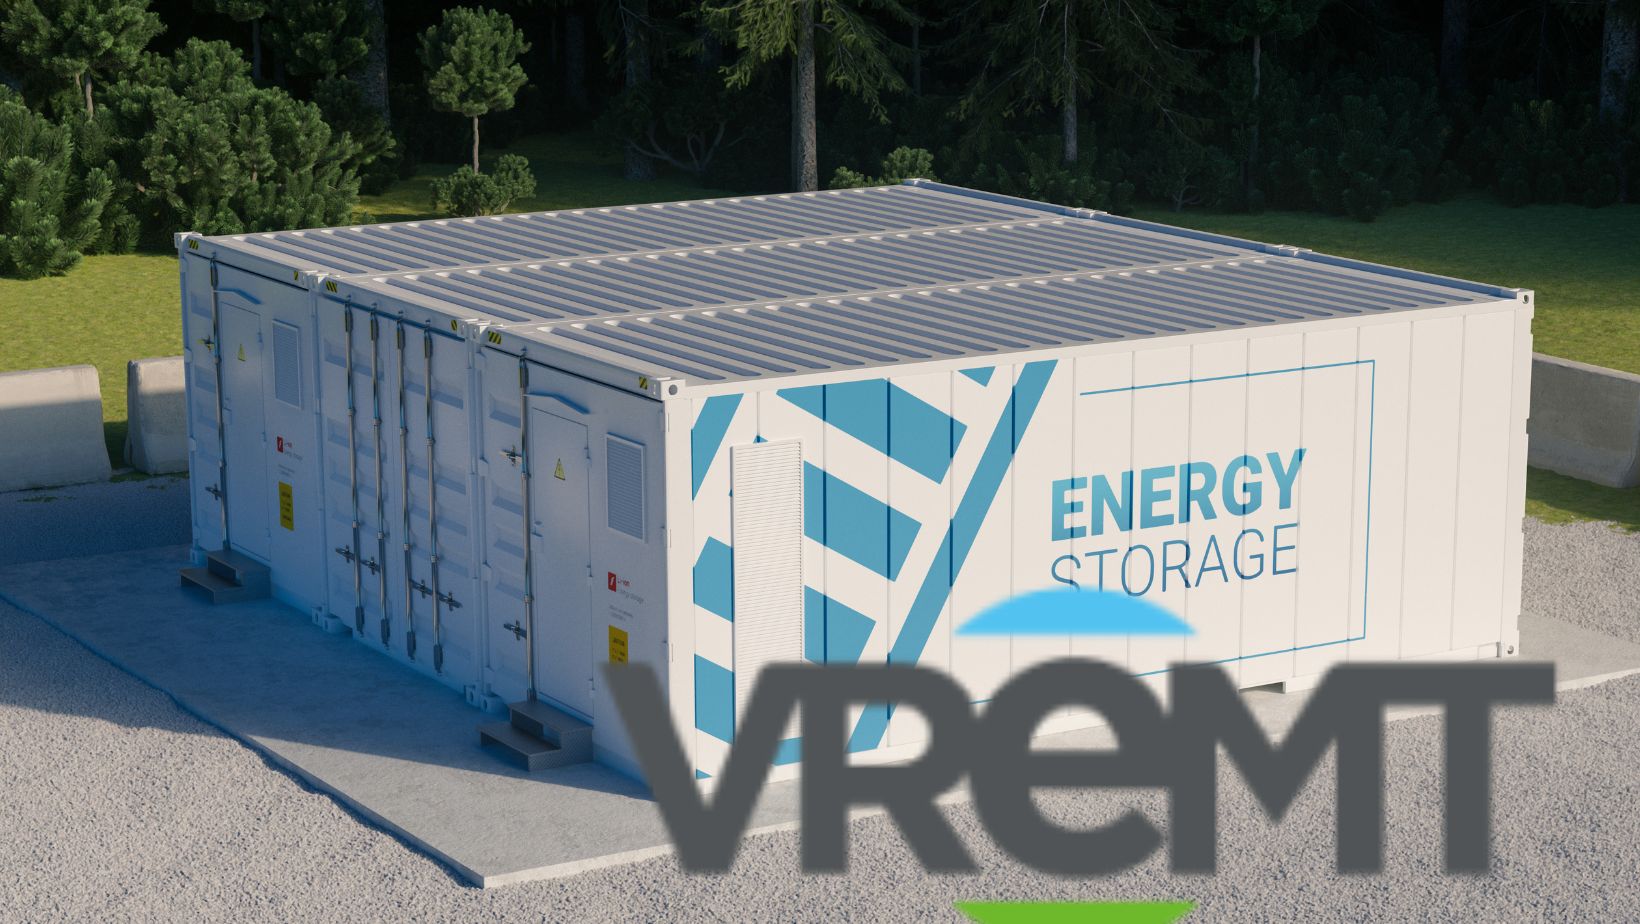 The Ultimate Guide to Choosing an Energy Storage System Supplier